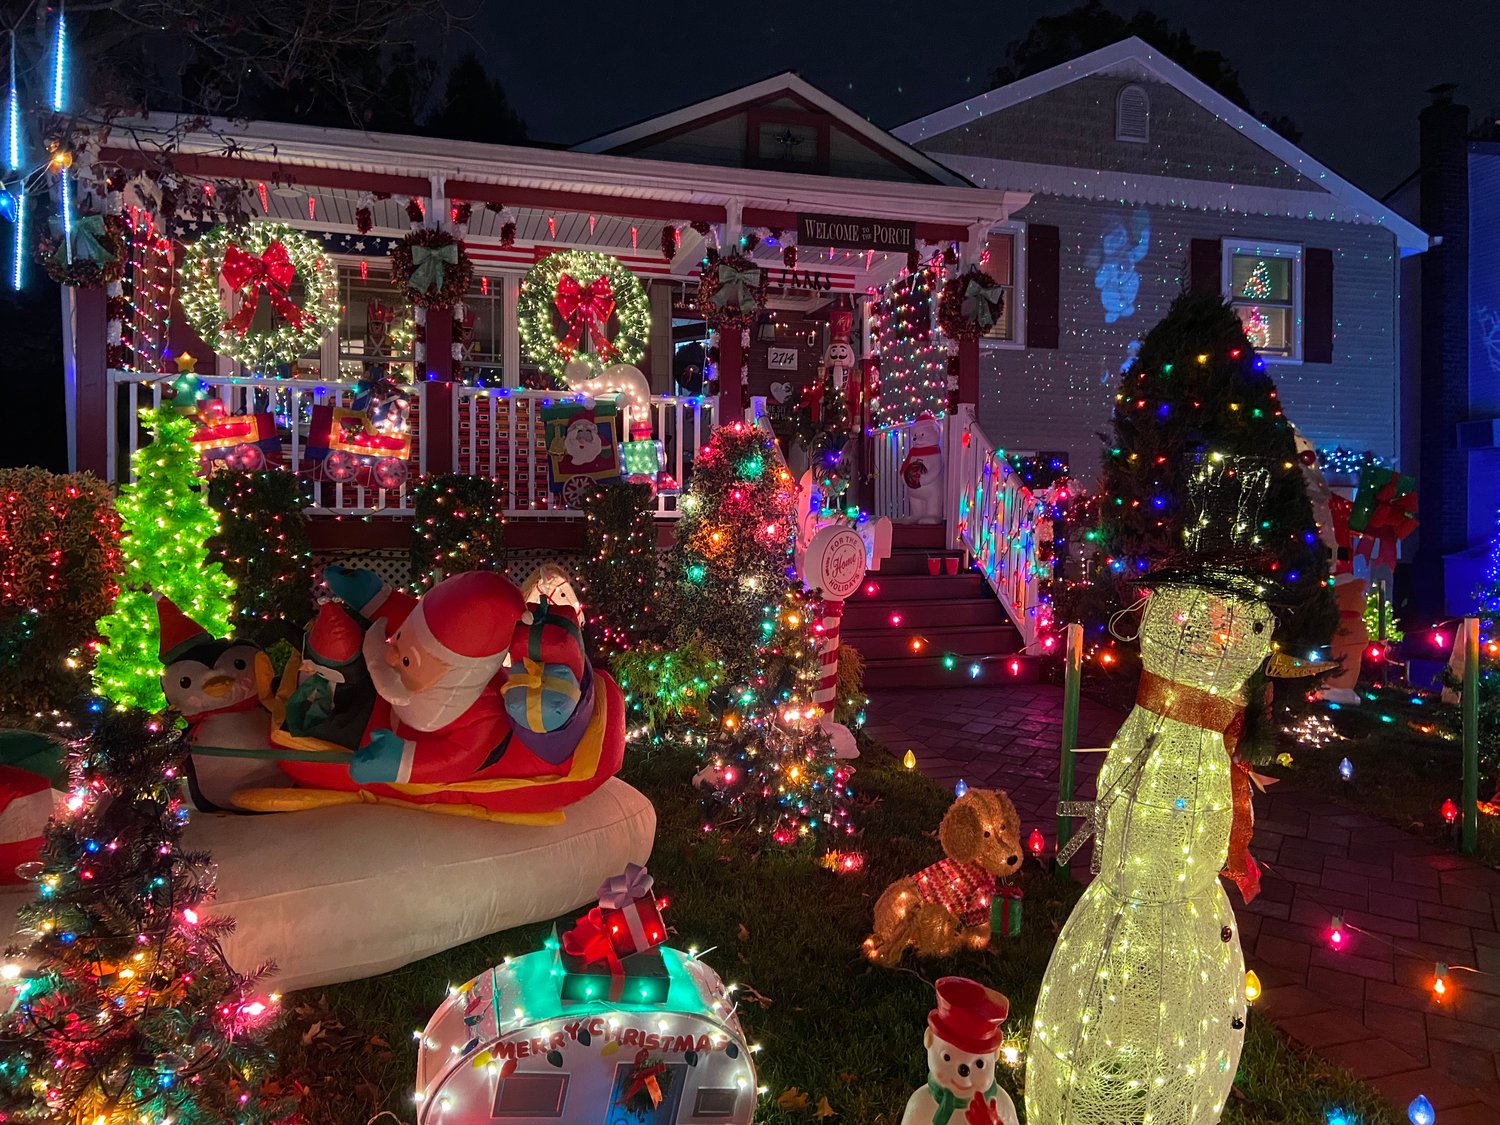 The Gargiulo house in Salisbury has thousands of Christmas lights and decorations inside and out.